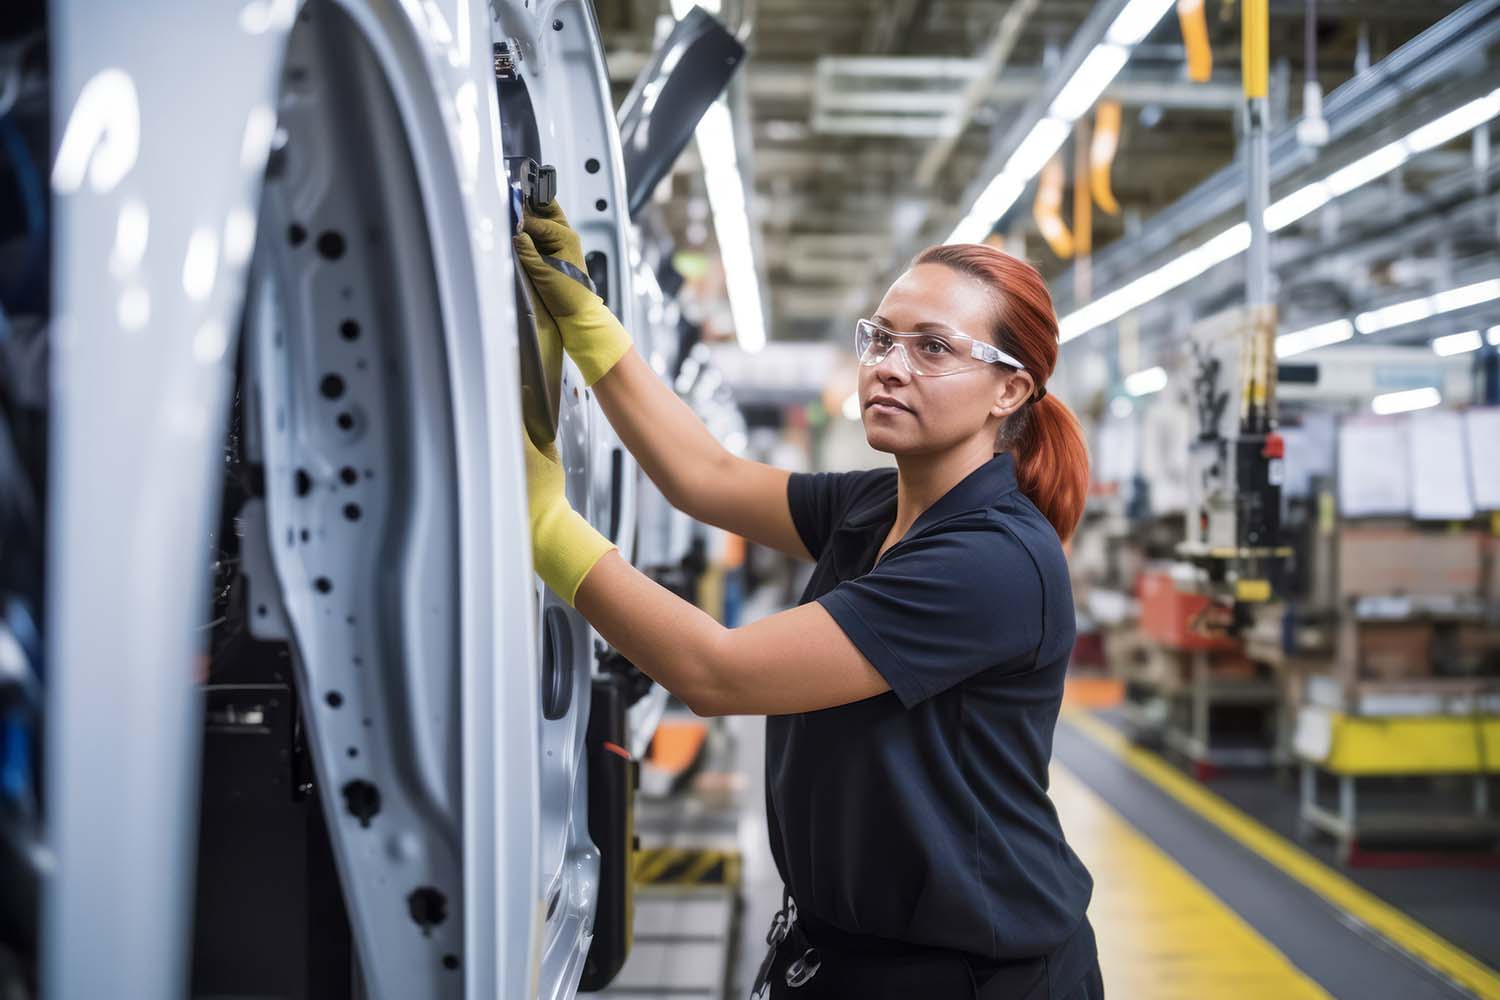 With a more  diverse, equitable and inclusive  workforce, a  manufacturer  creates an optimal team-based  environment that tends to design better products and boost  productivity.